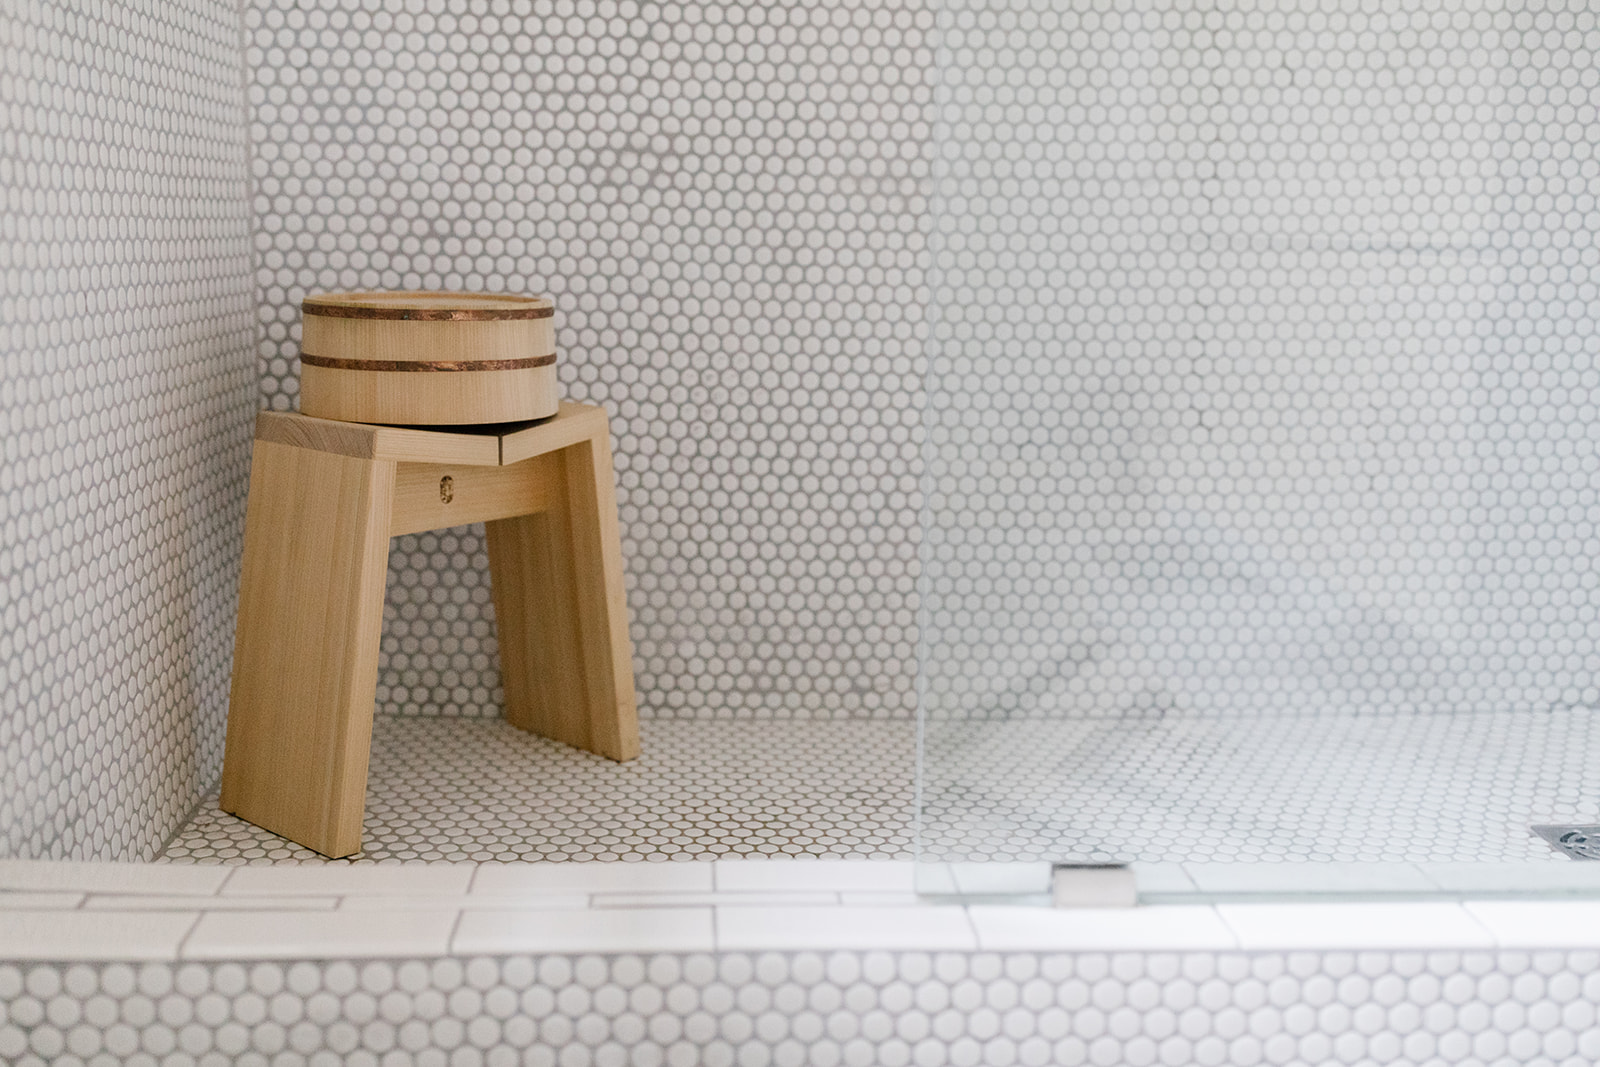 wood stool and bathing bucket in shower